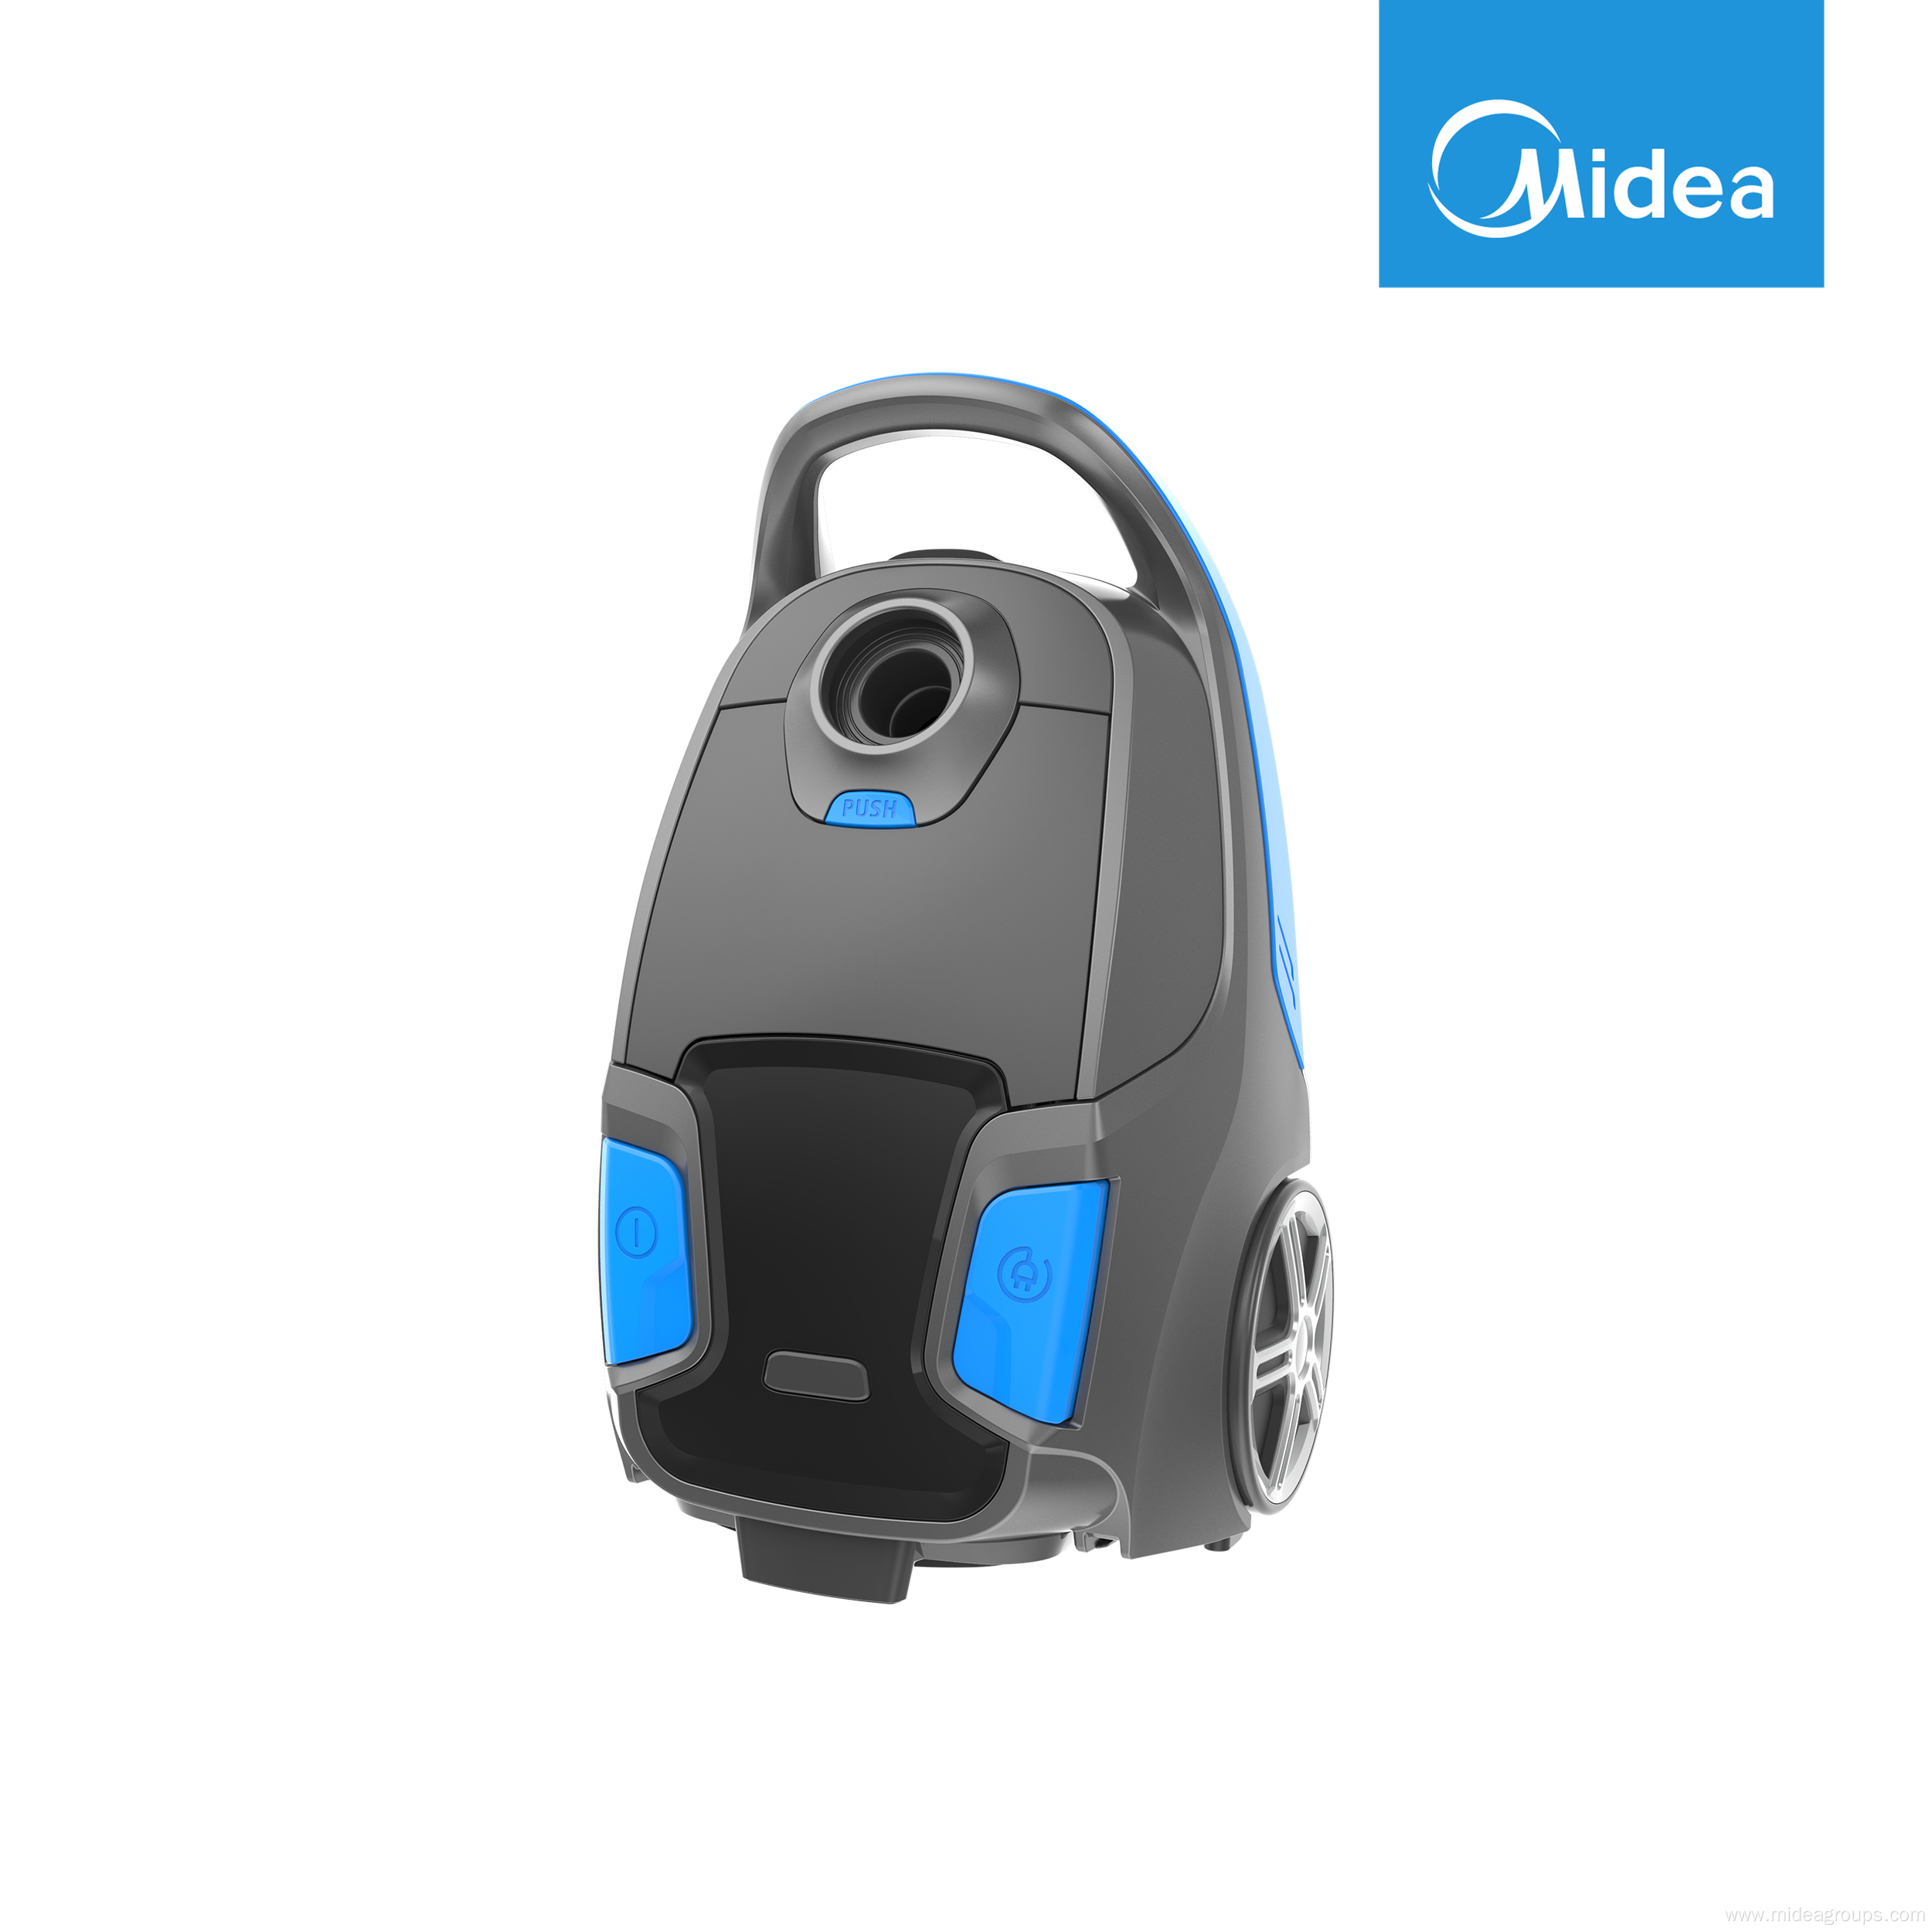 Canister Vacuum Cleaner